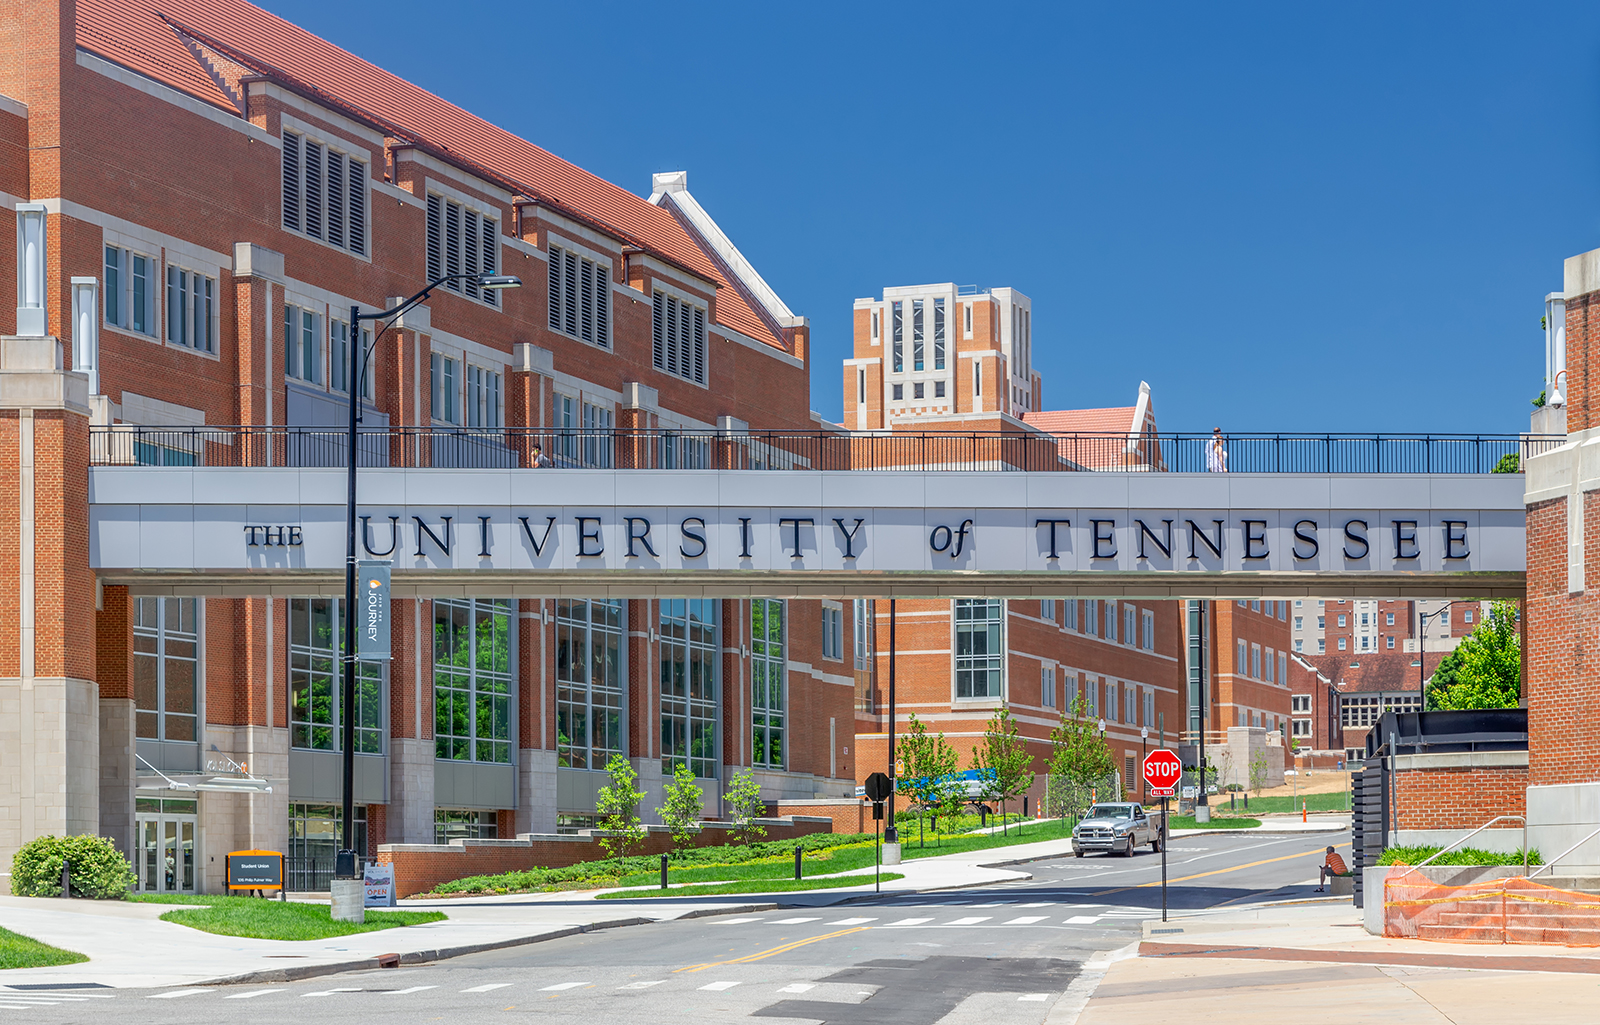 Entrance and walkway to the the campus of the University of Tennessee in Knoxville as seen on June 4, 2018.